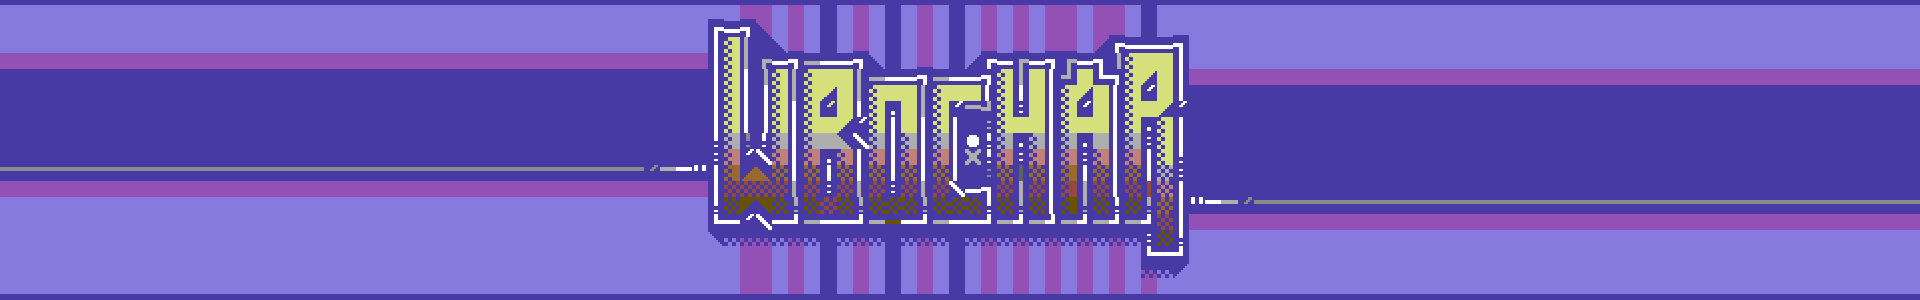 PETSCII: Trashcan Humour / Forth may the with you be!